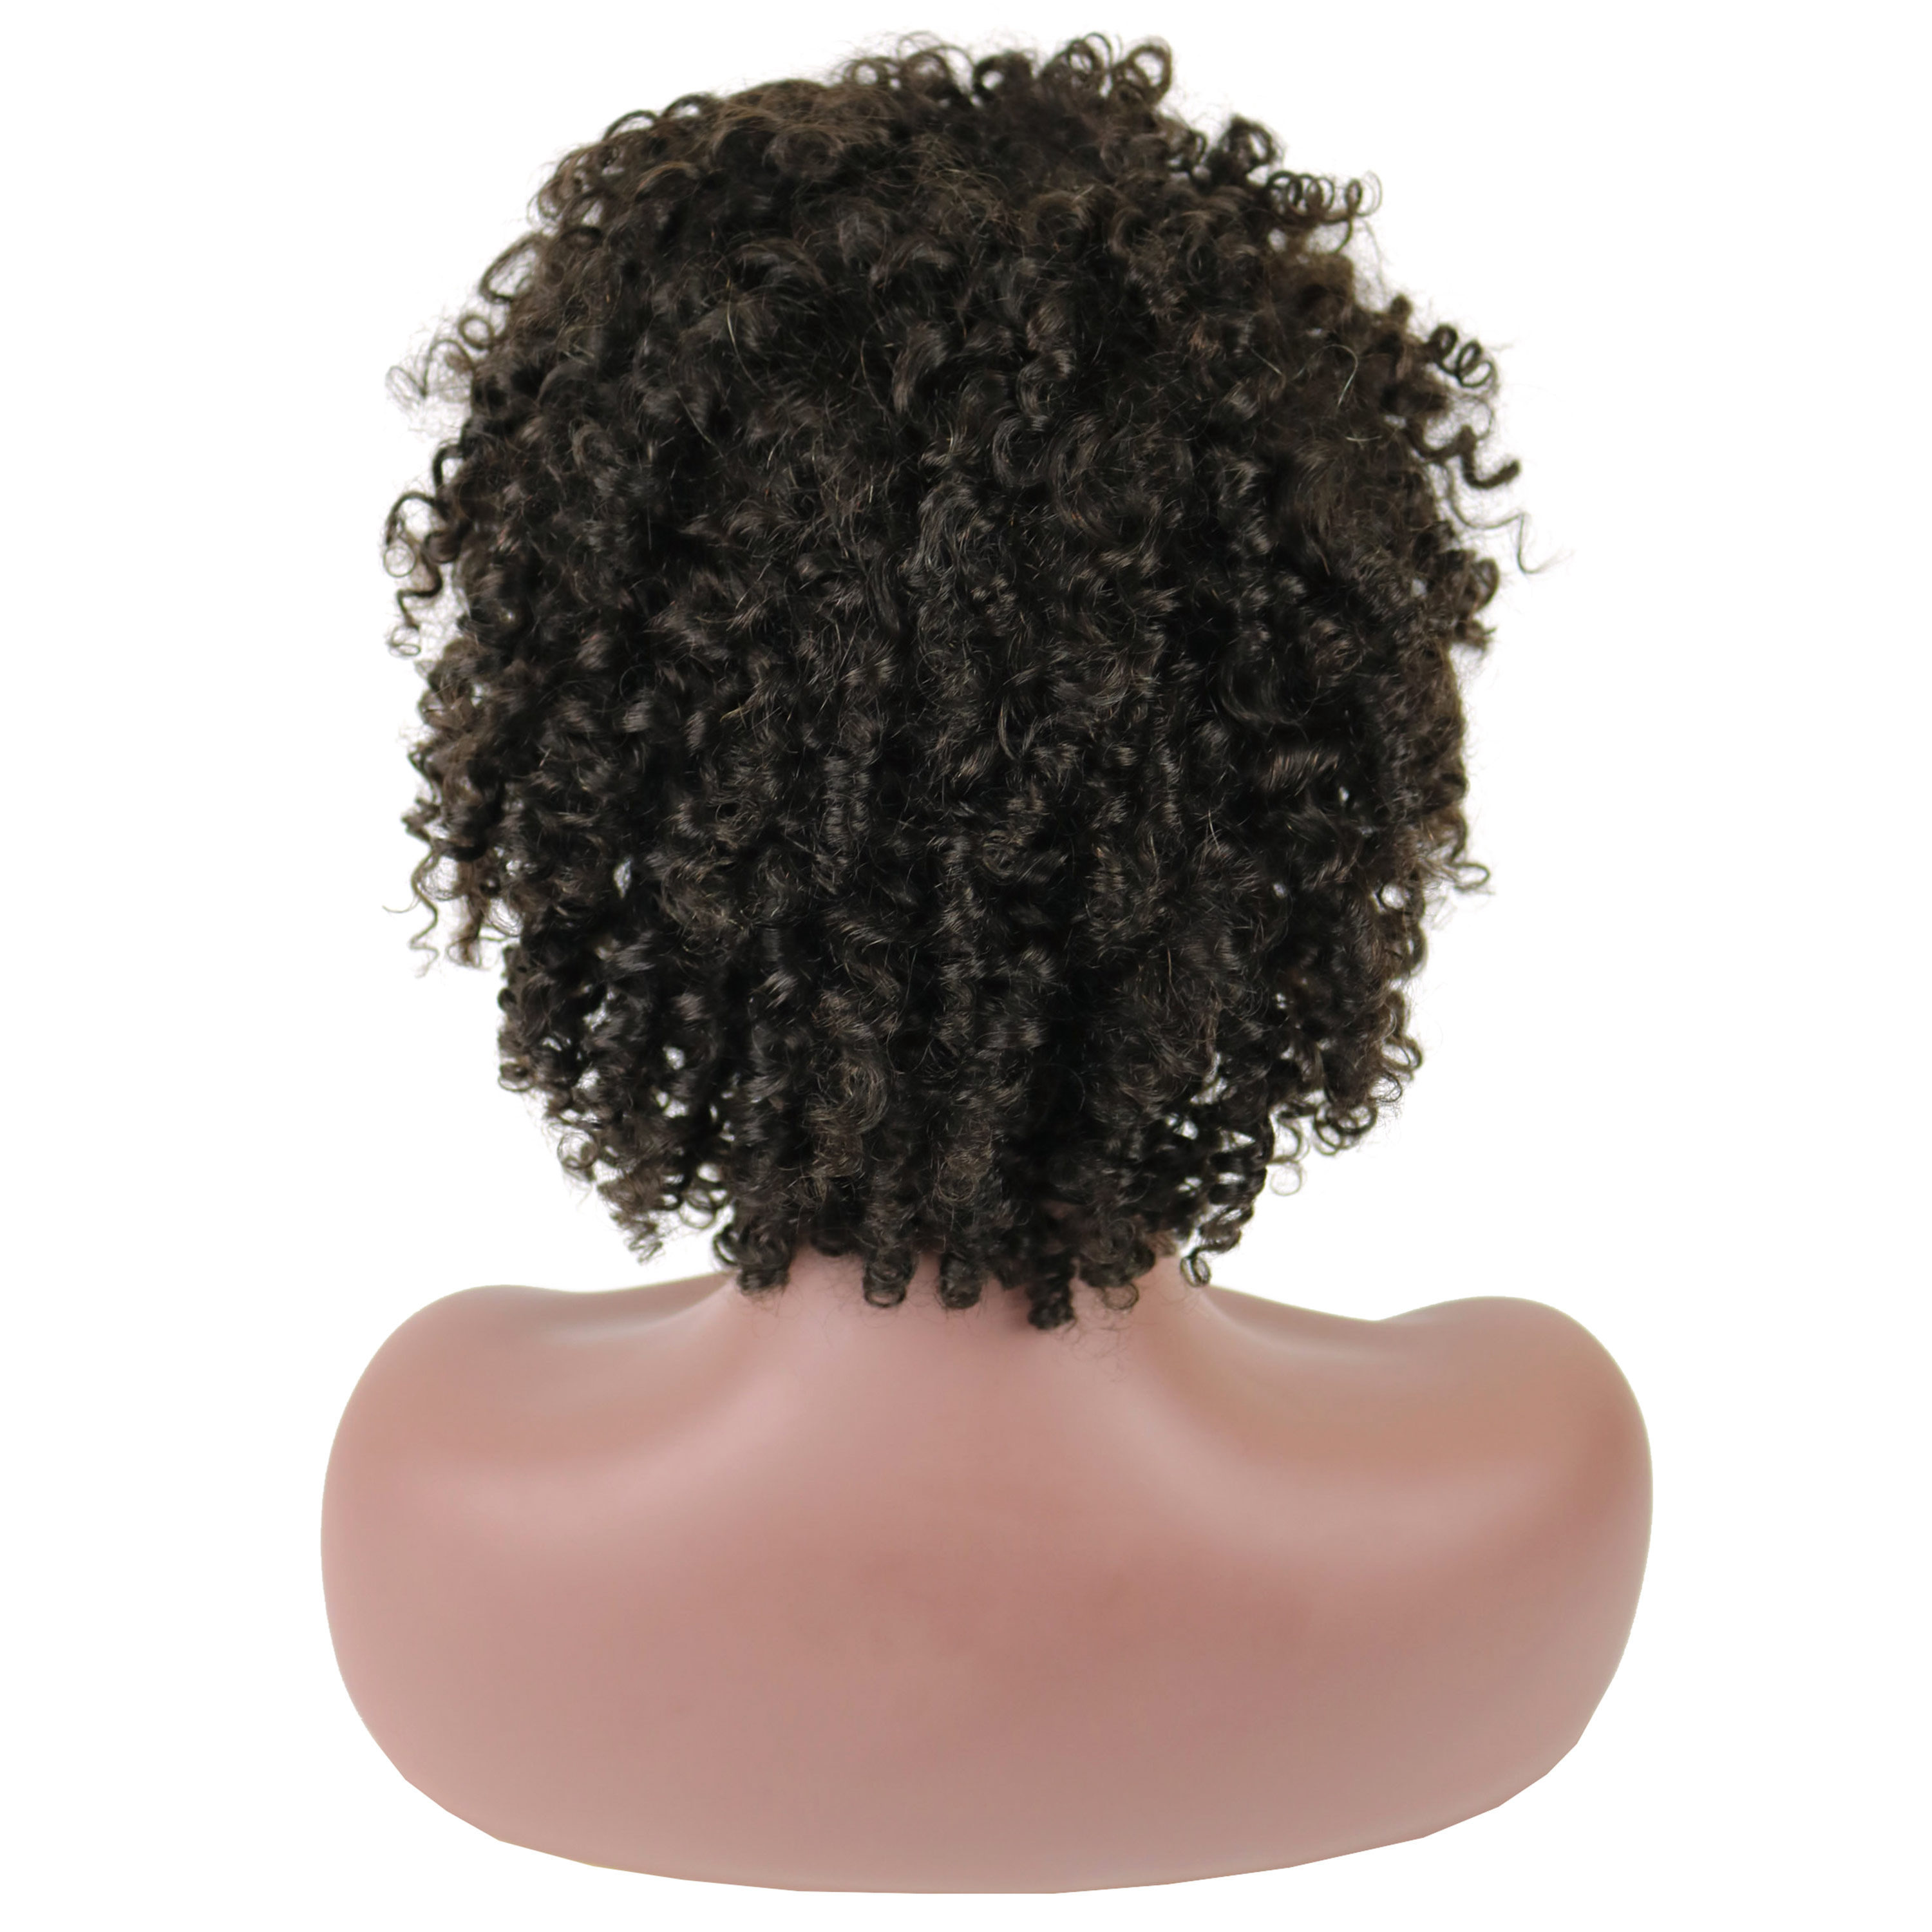 Short Kinky Curly African American Human Hair Lace Front Cap Wigs 10 Inches